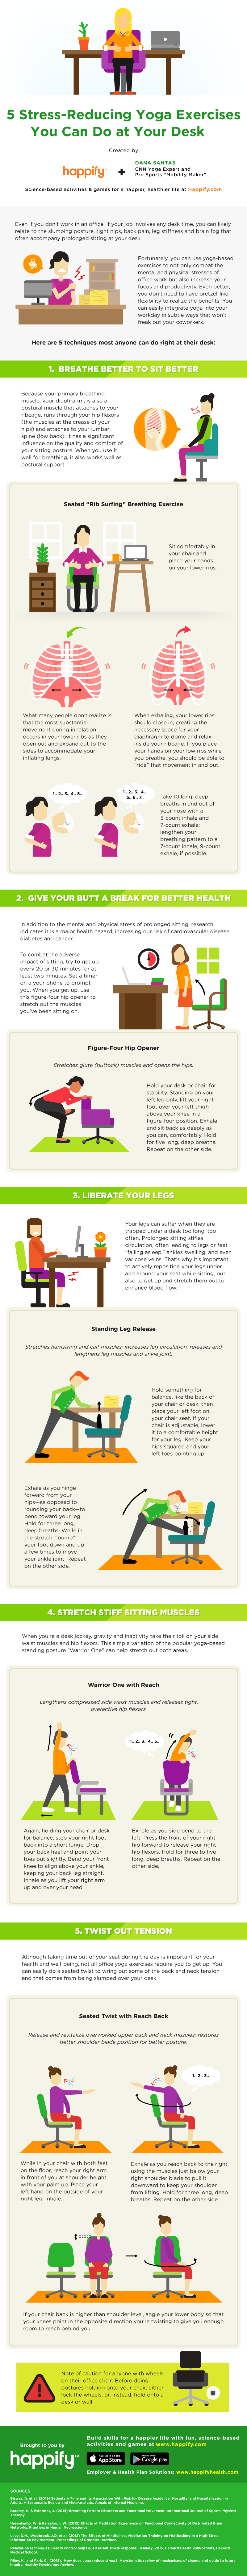 5 Stress Reducing Yoga Exercise You Can Do At Your Desk - #infographic